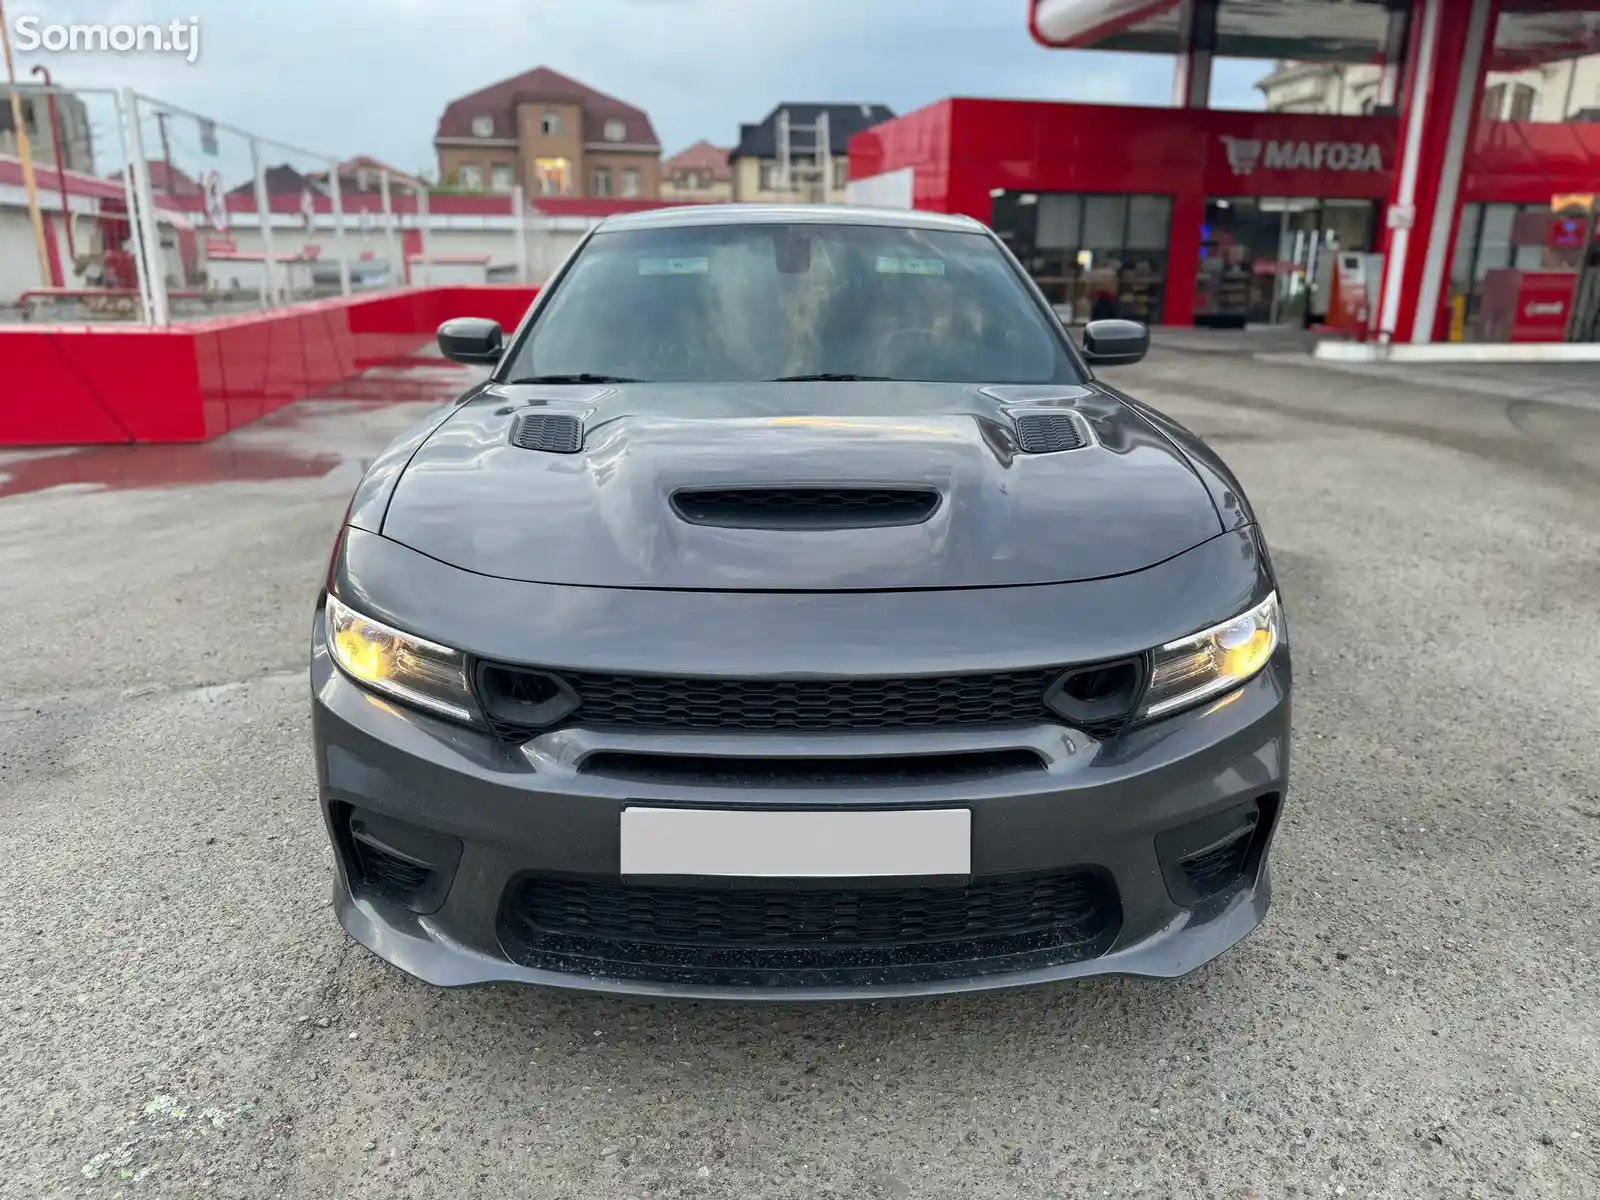 Dodge Charger, 2018-4